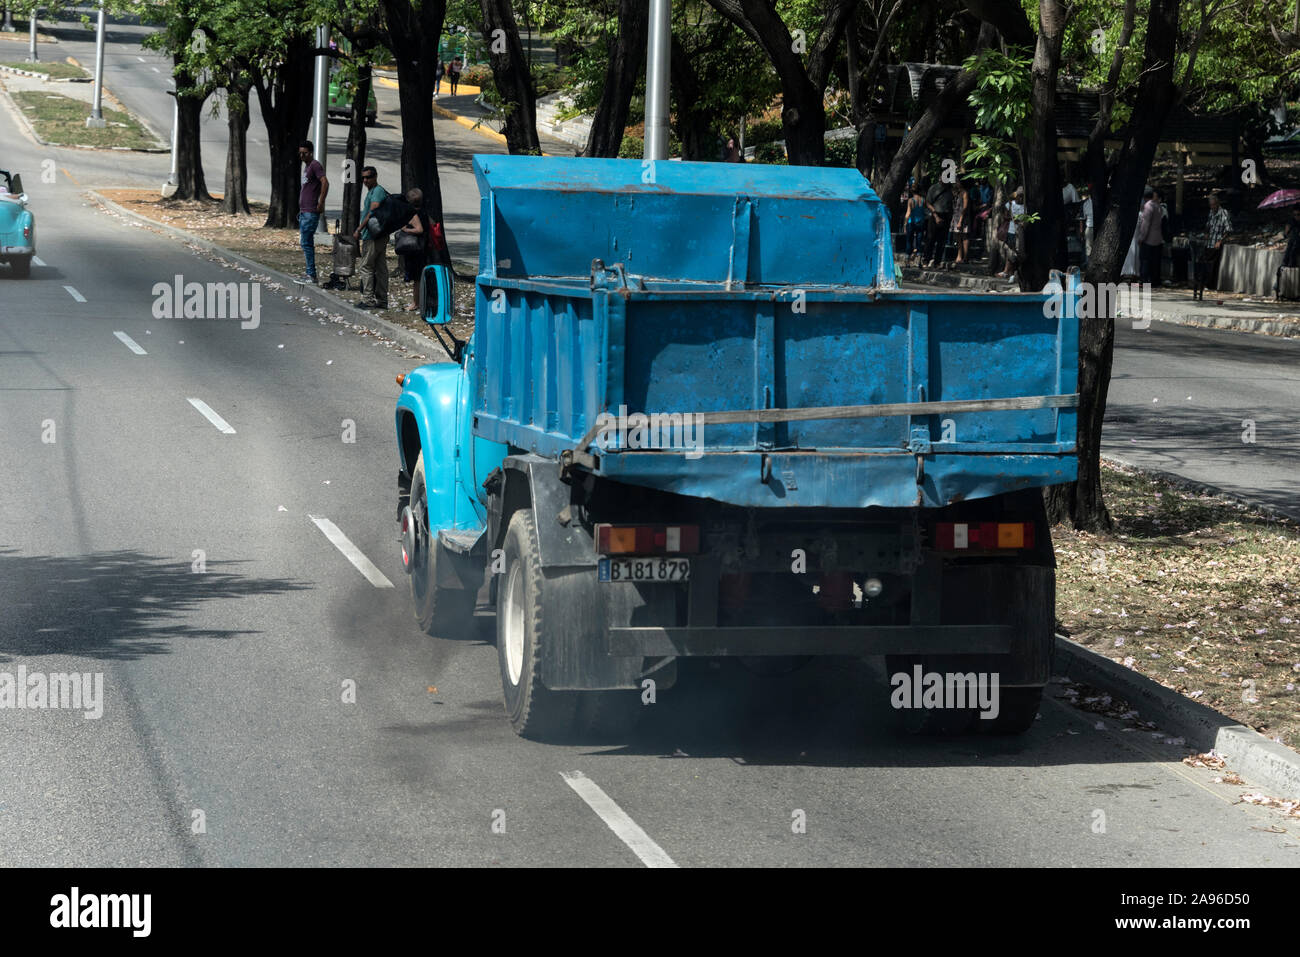 One of the many trucks and buses on the roads of Havana in Cuba, belching out thick diesel fumes due to lack of vehicle maintenance and poor fuel qua Stock Photo